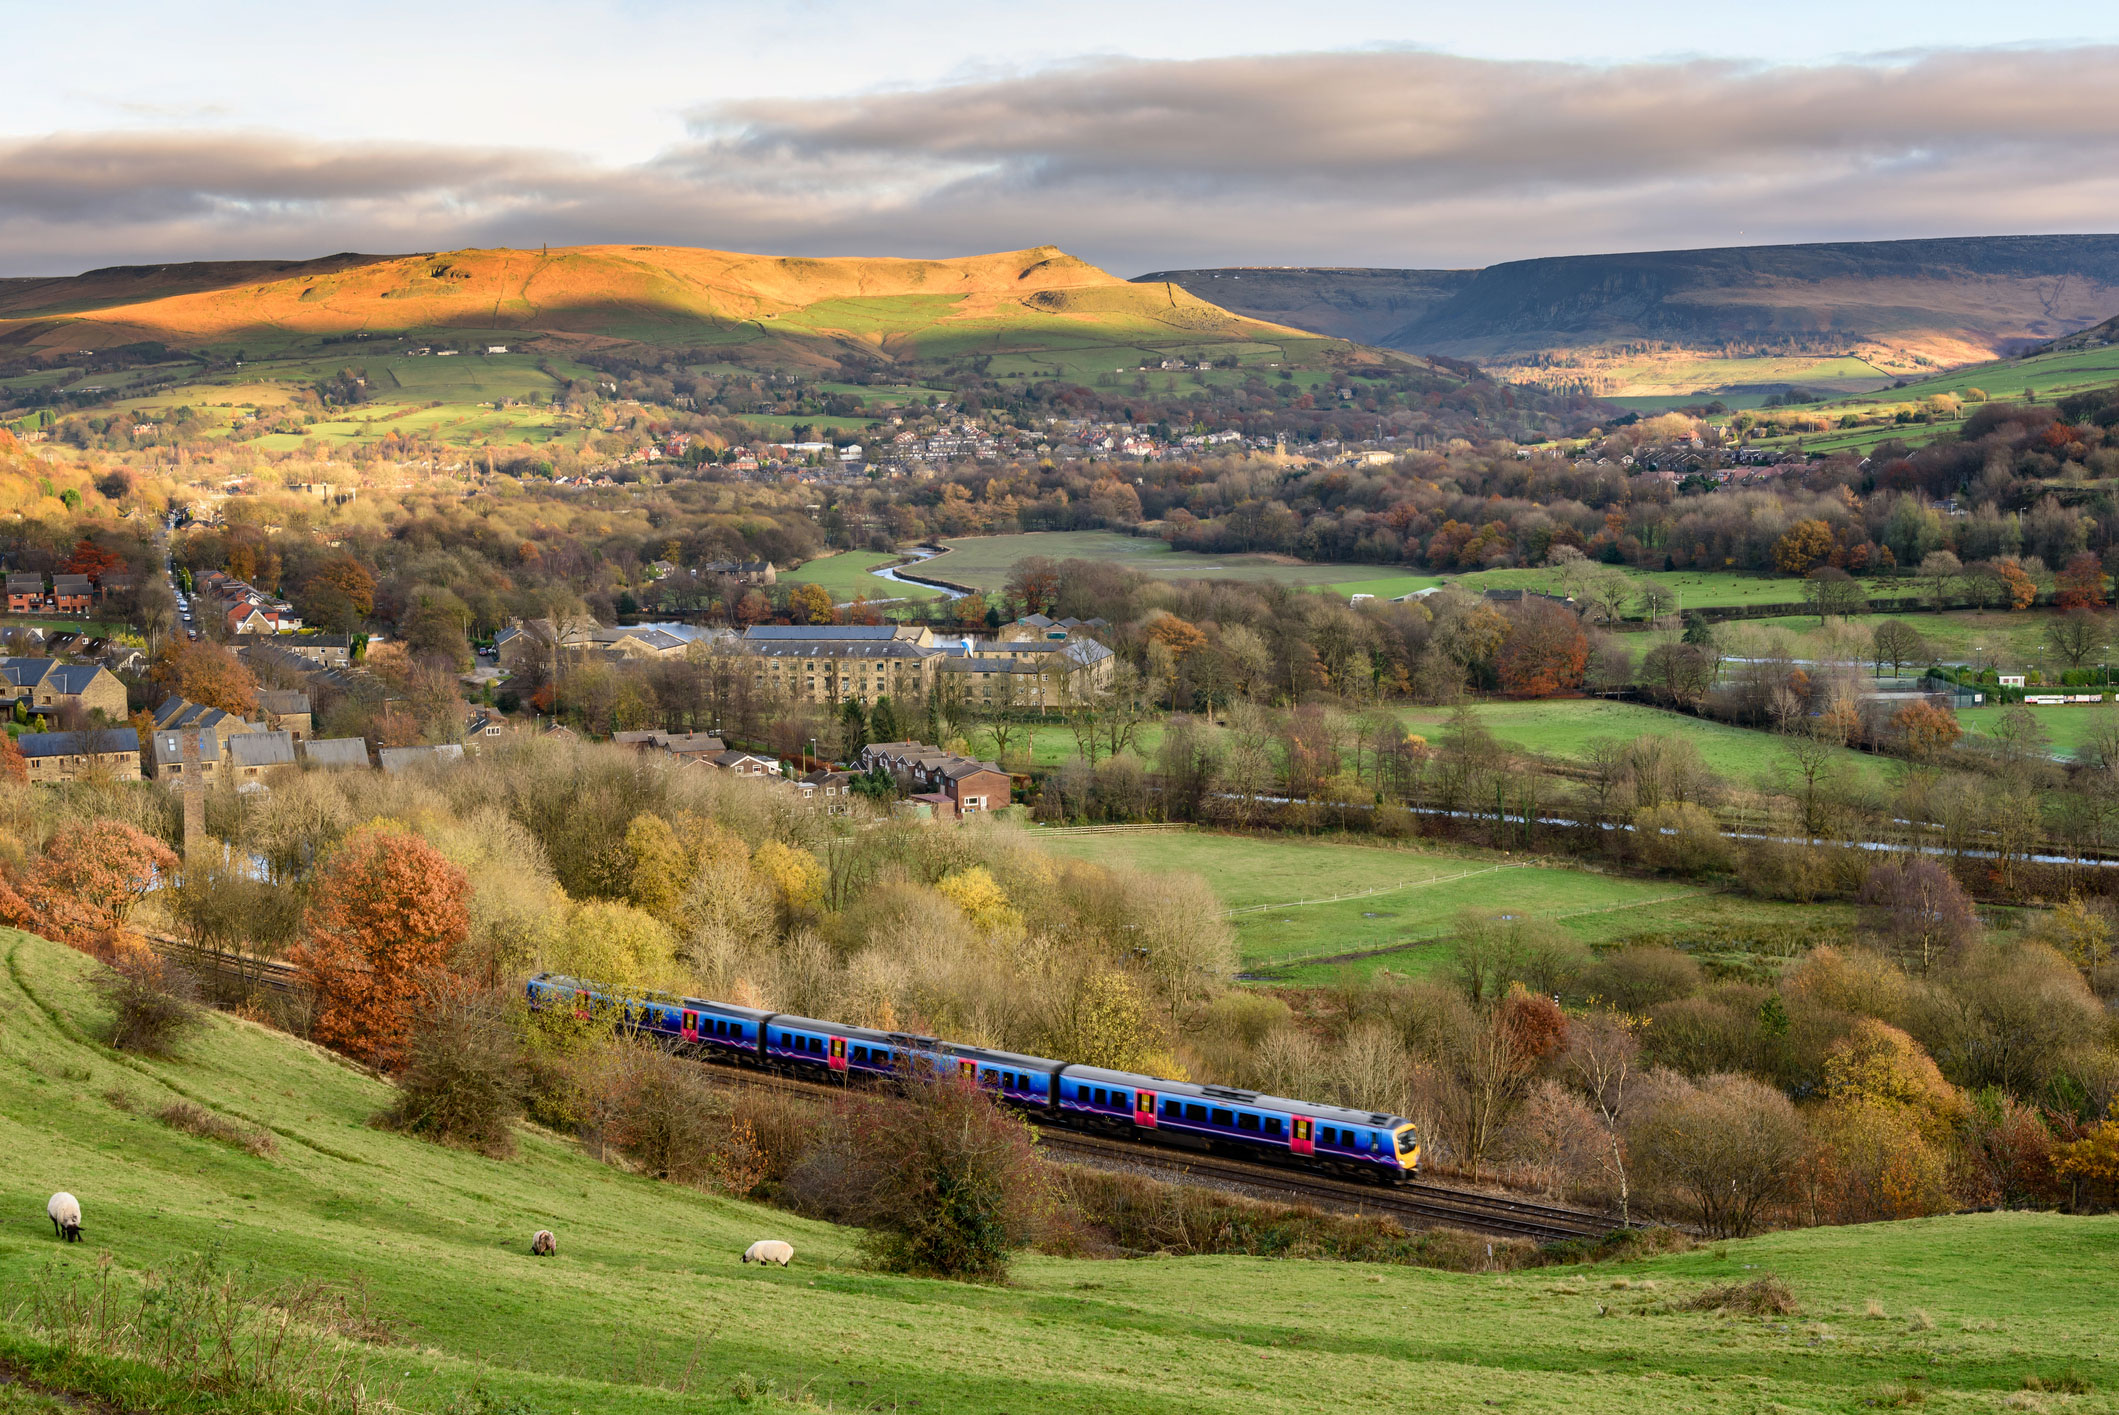 uk train on tracks going through hilly British countryside